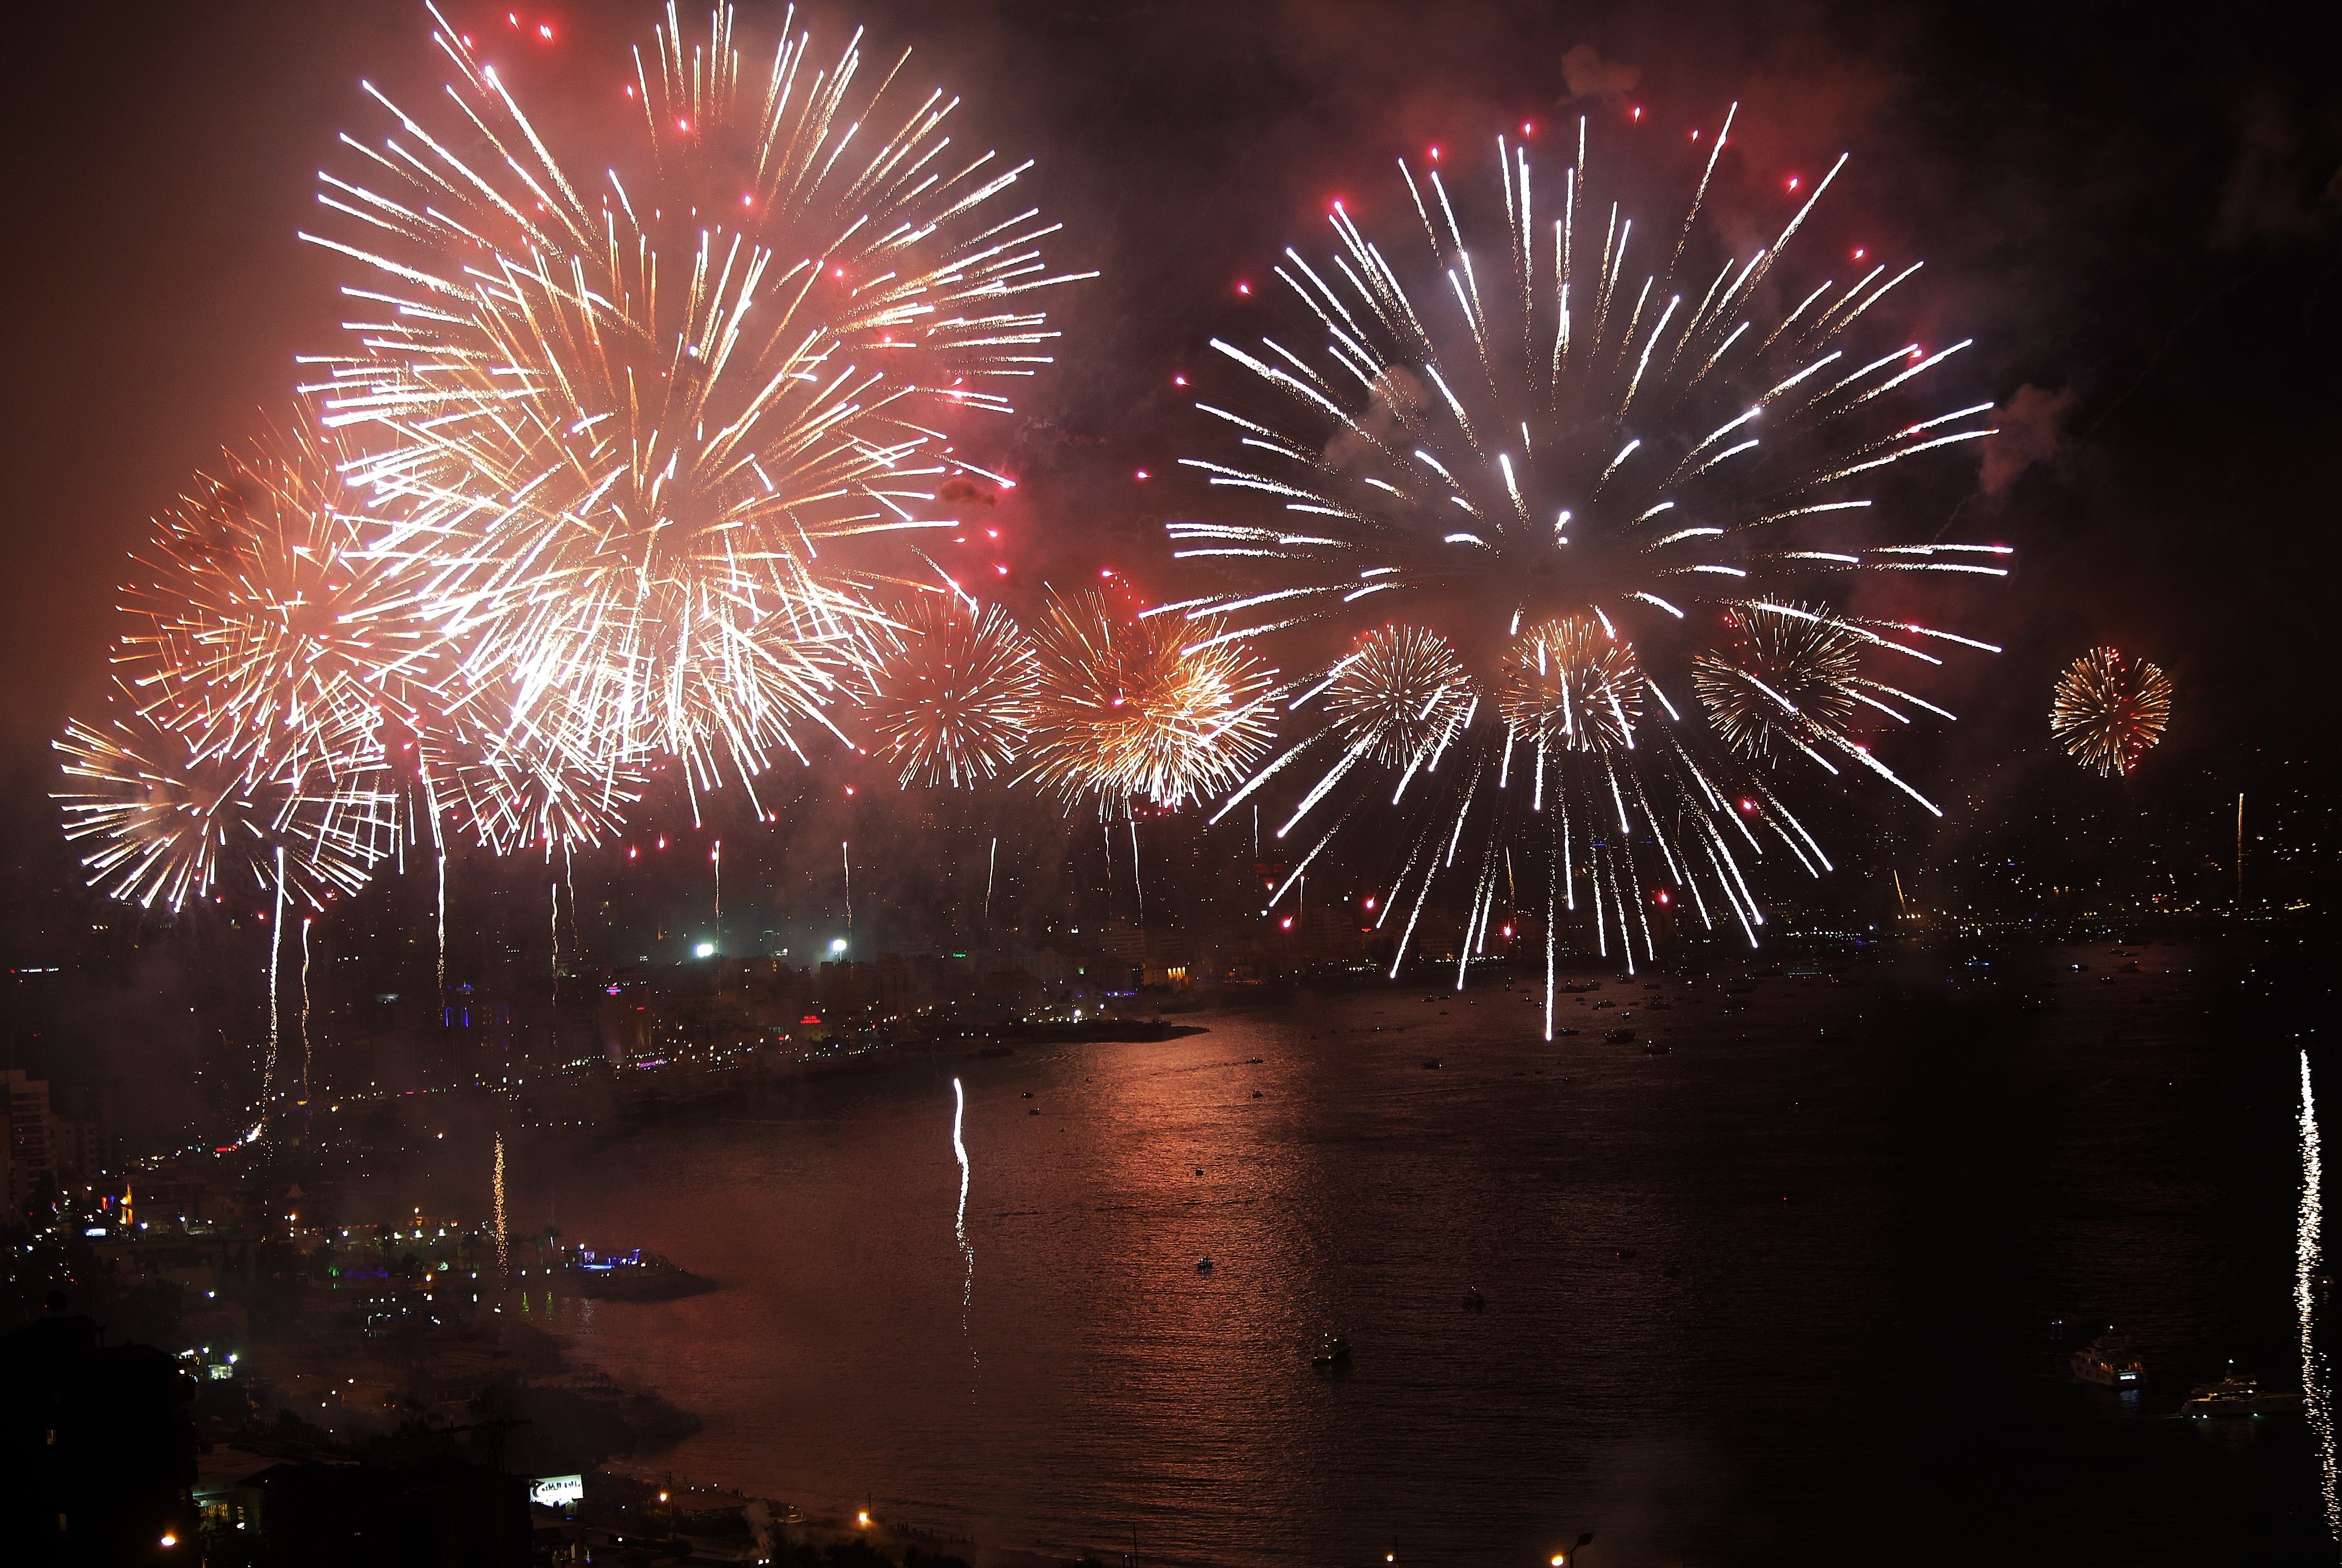 Fireworks light the skies of Lebanon's Jounieh Bey, during the opening ceremony of Jounieh International Festival on June 27, 2014. (Joseph Eid—AFP/Getty Images)